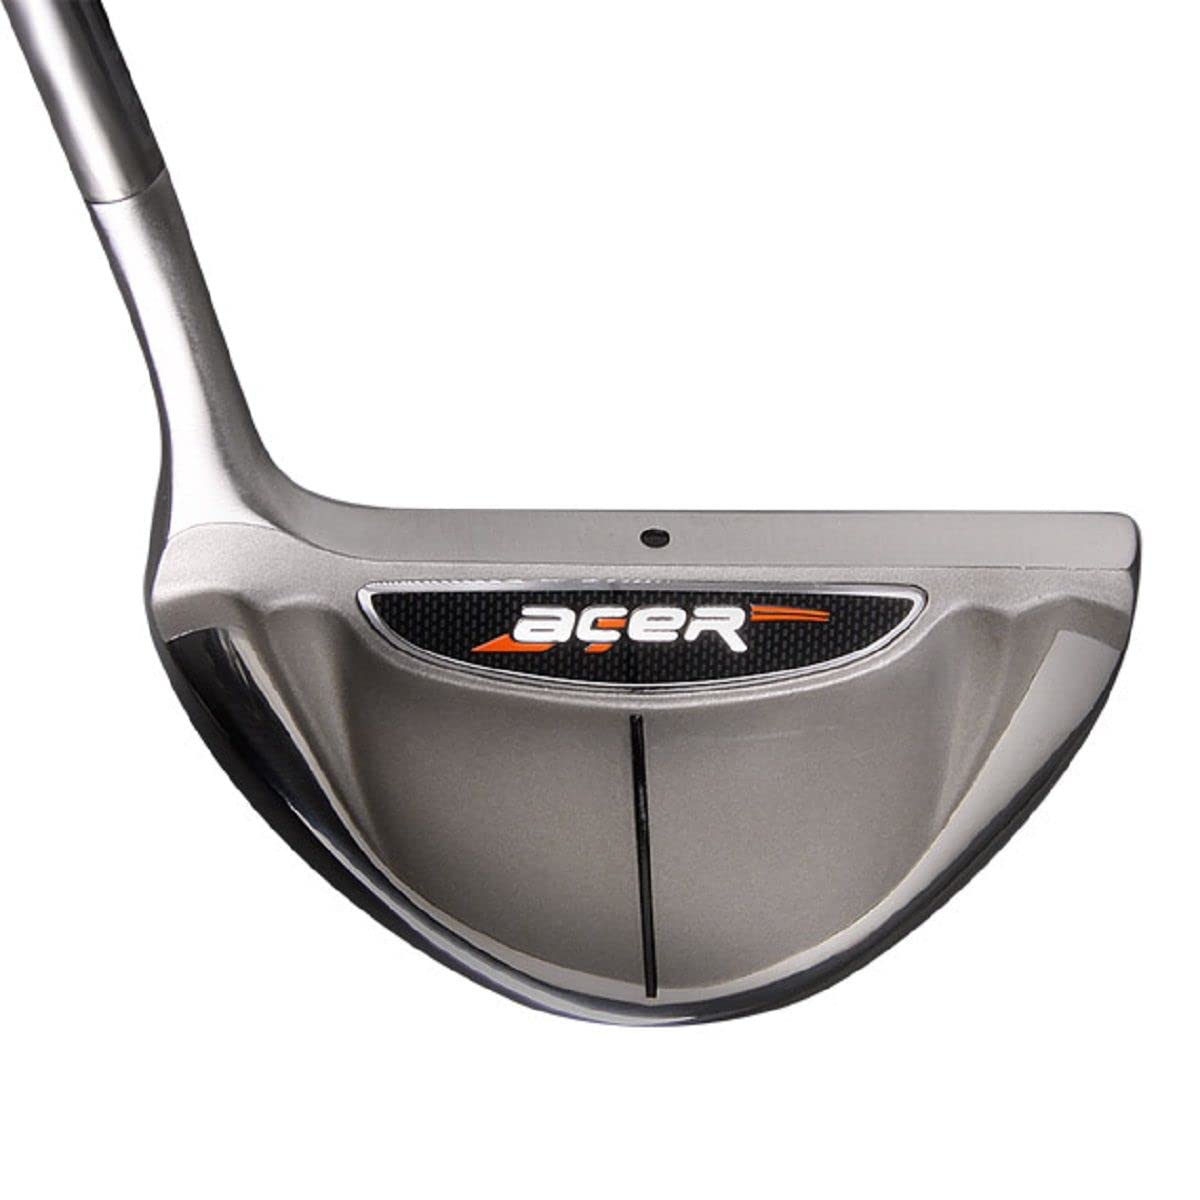 Acer XK Chipper Golf Club Series | Choose Between Two Different Lofts for Pitching and Chipping | Unisex Right or Left Hand